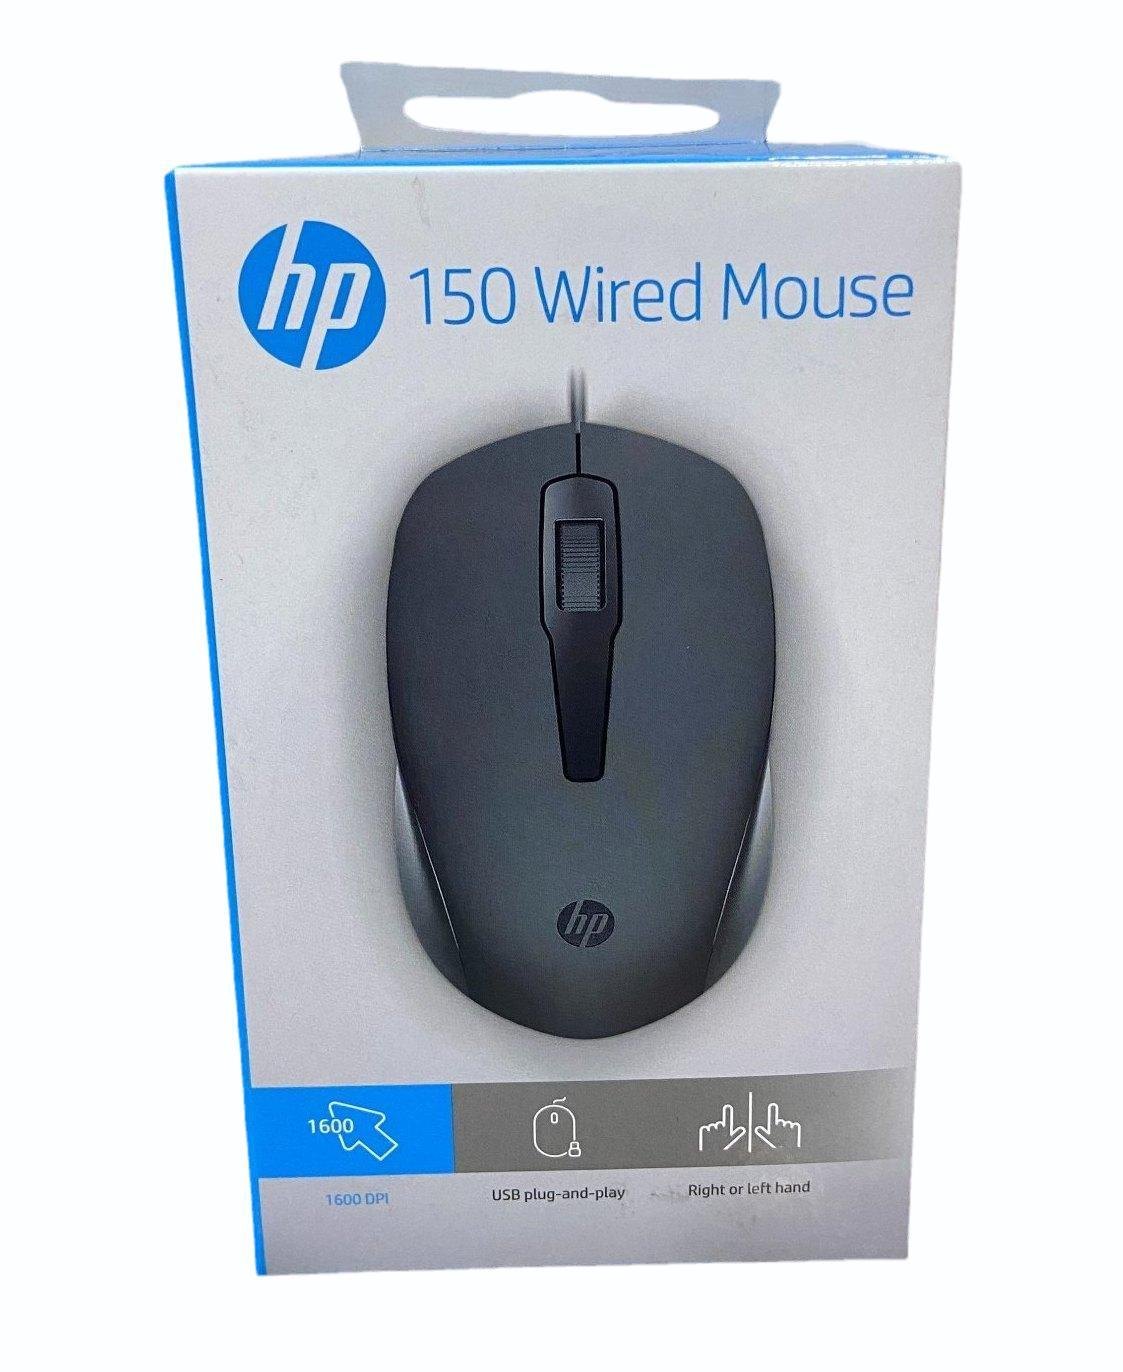 HP MOUSE-DS-HP 150 WIRED MOUSE